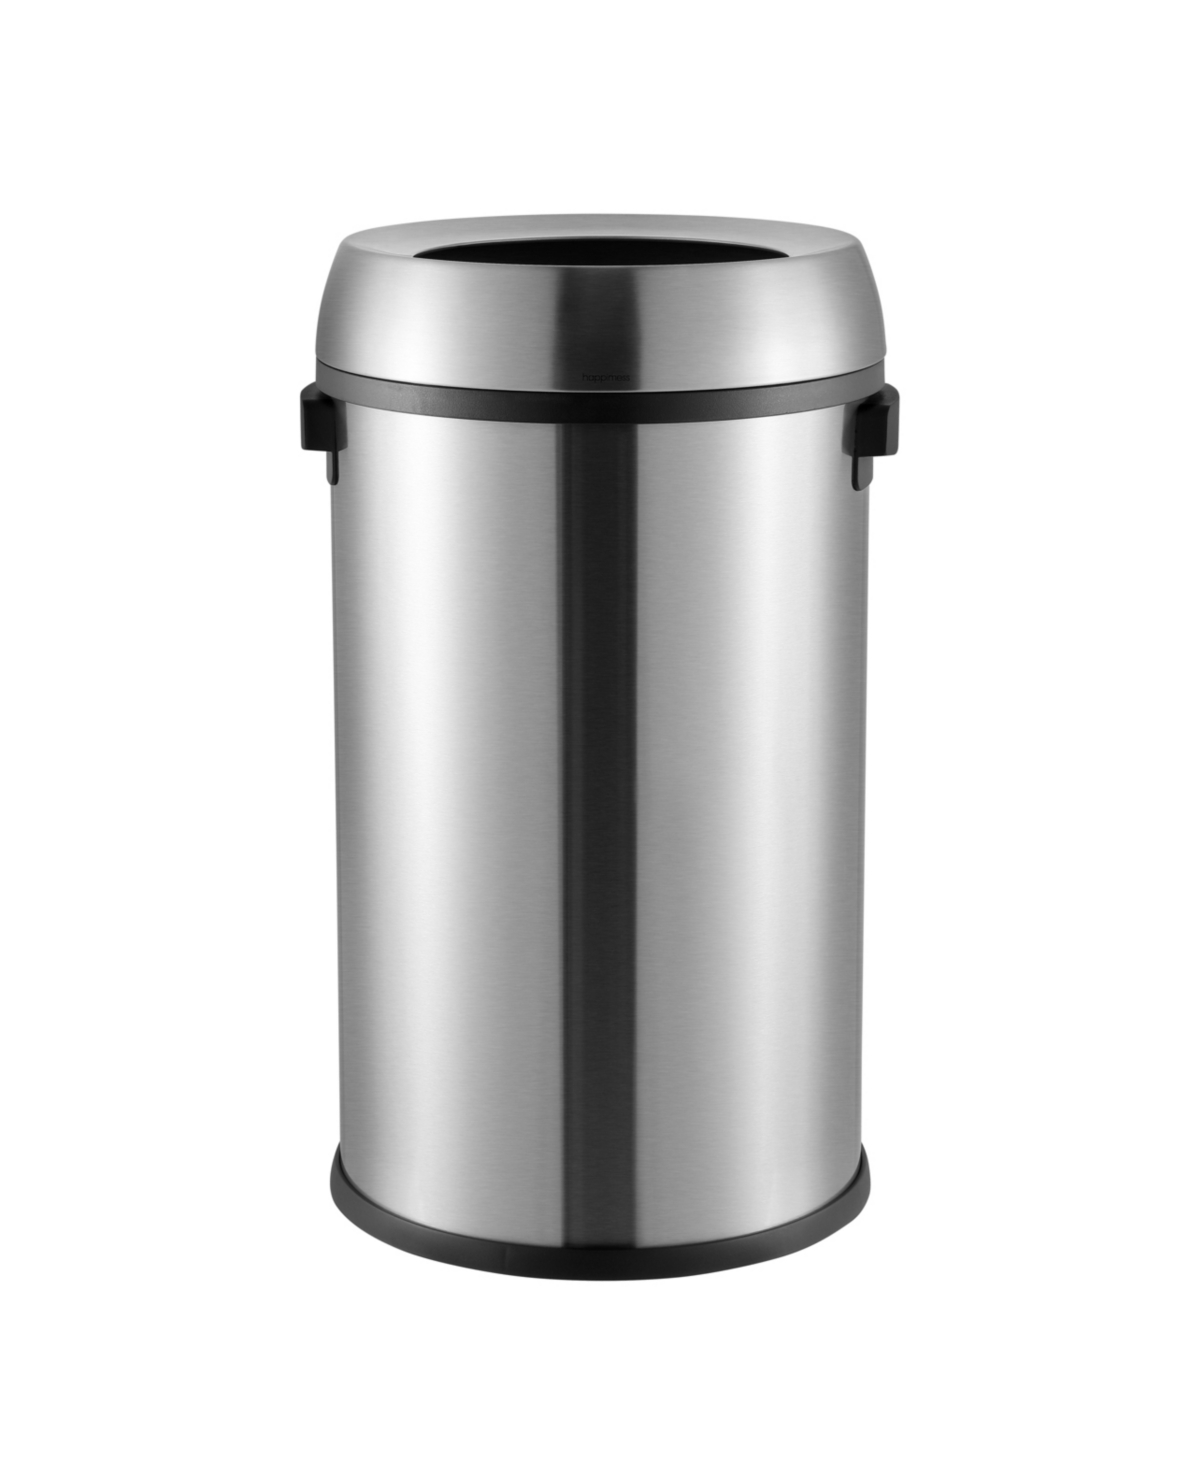 Chuck Kitchen/Office Open-Top Trash Can - Chrome